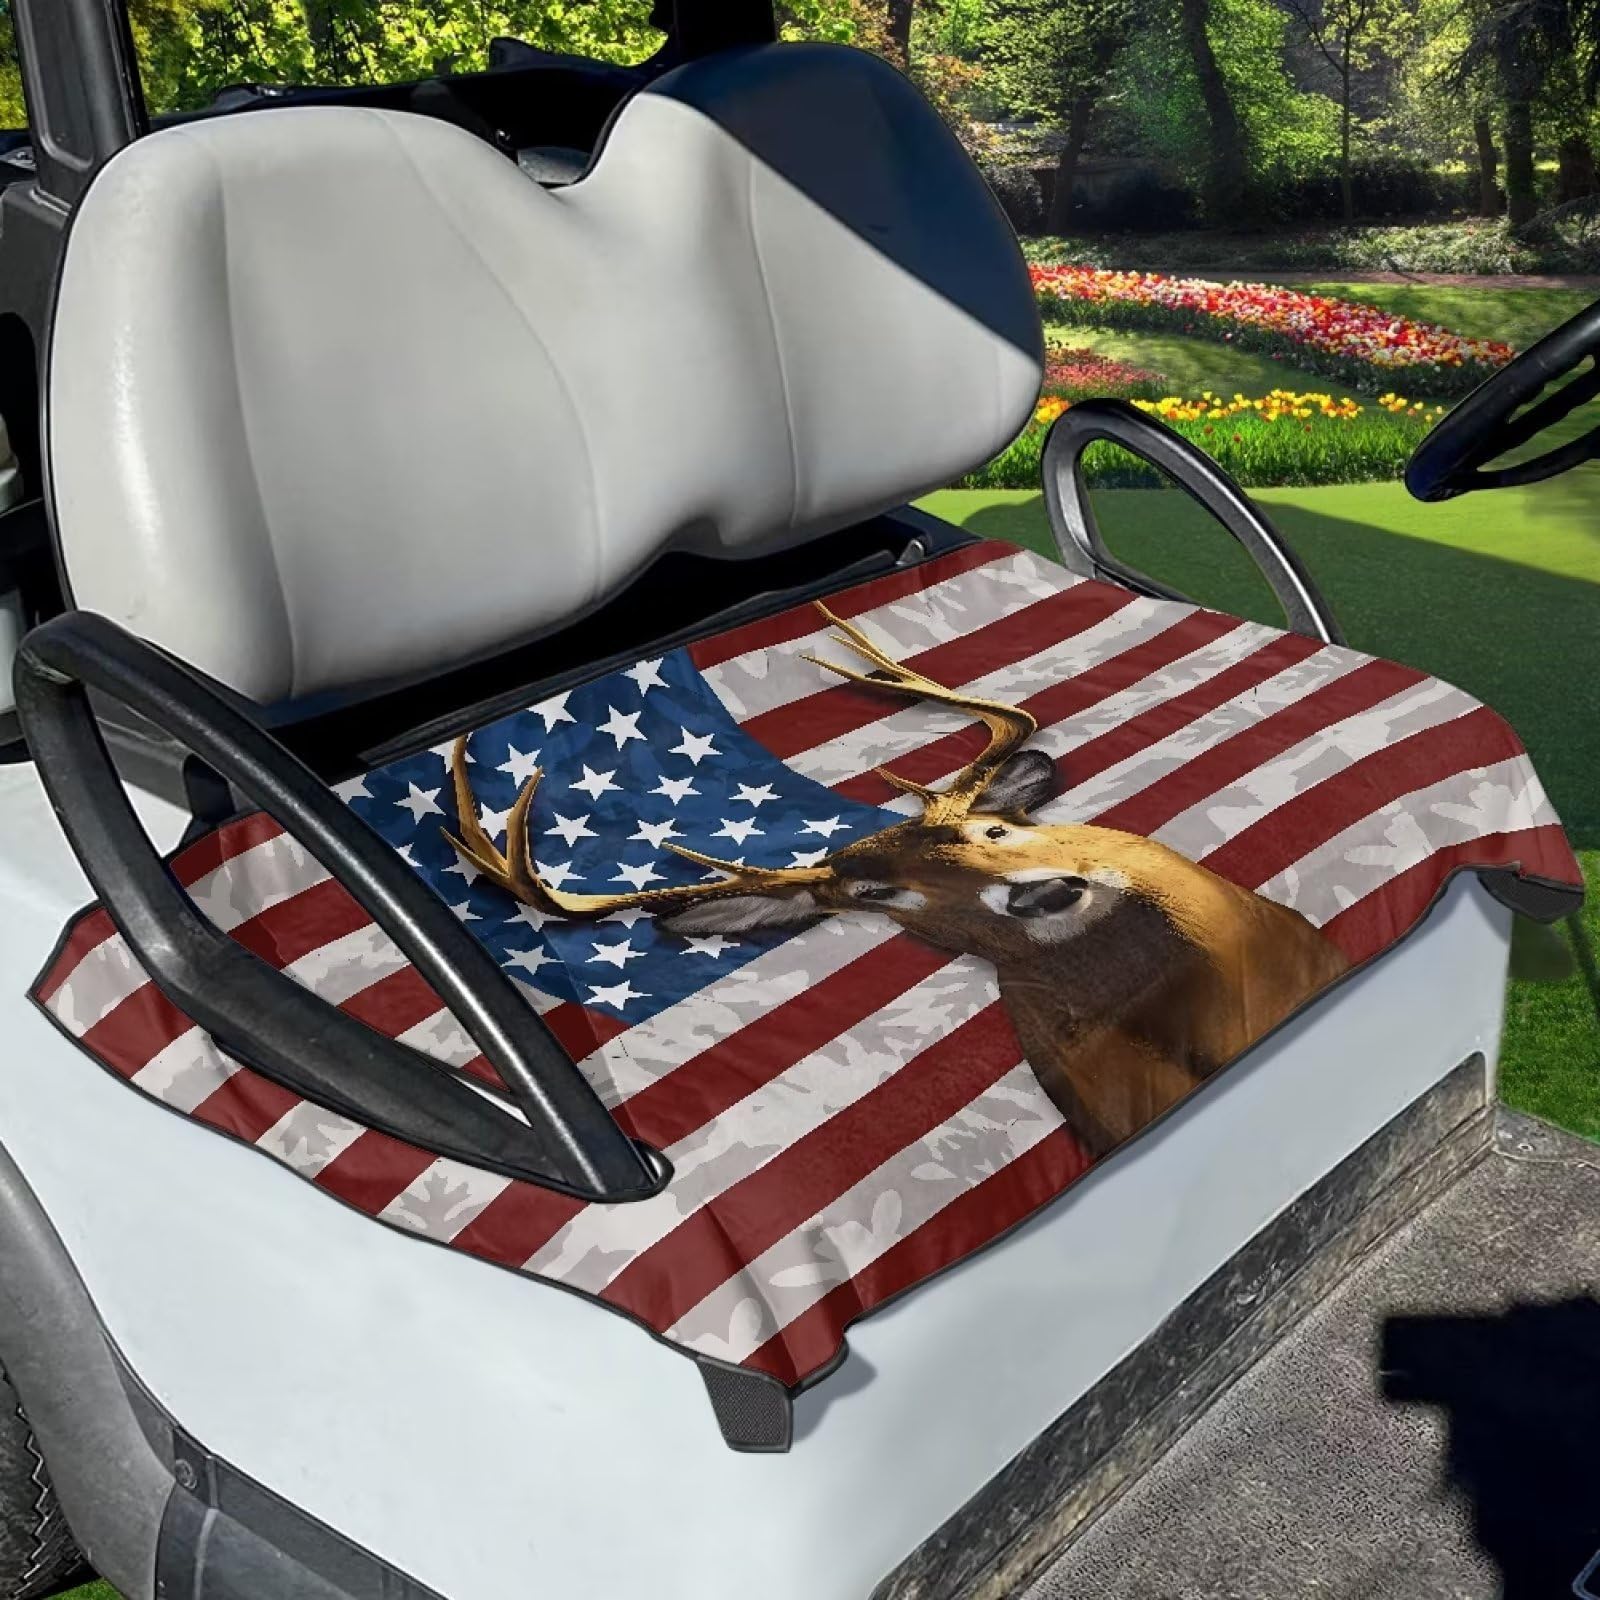 Xoenoiee American Falg Deer Print Sightseeing Car Cushion Cover, Golf Cart Seat Covers Golf Cart Seat Blanket Protect Your Golf Car Seat Form Stain Sweat, Easy to Clean von Xoenoiee